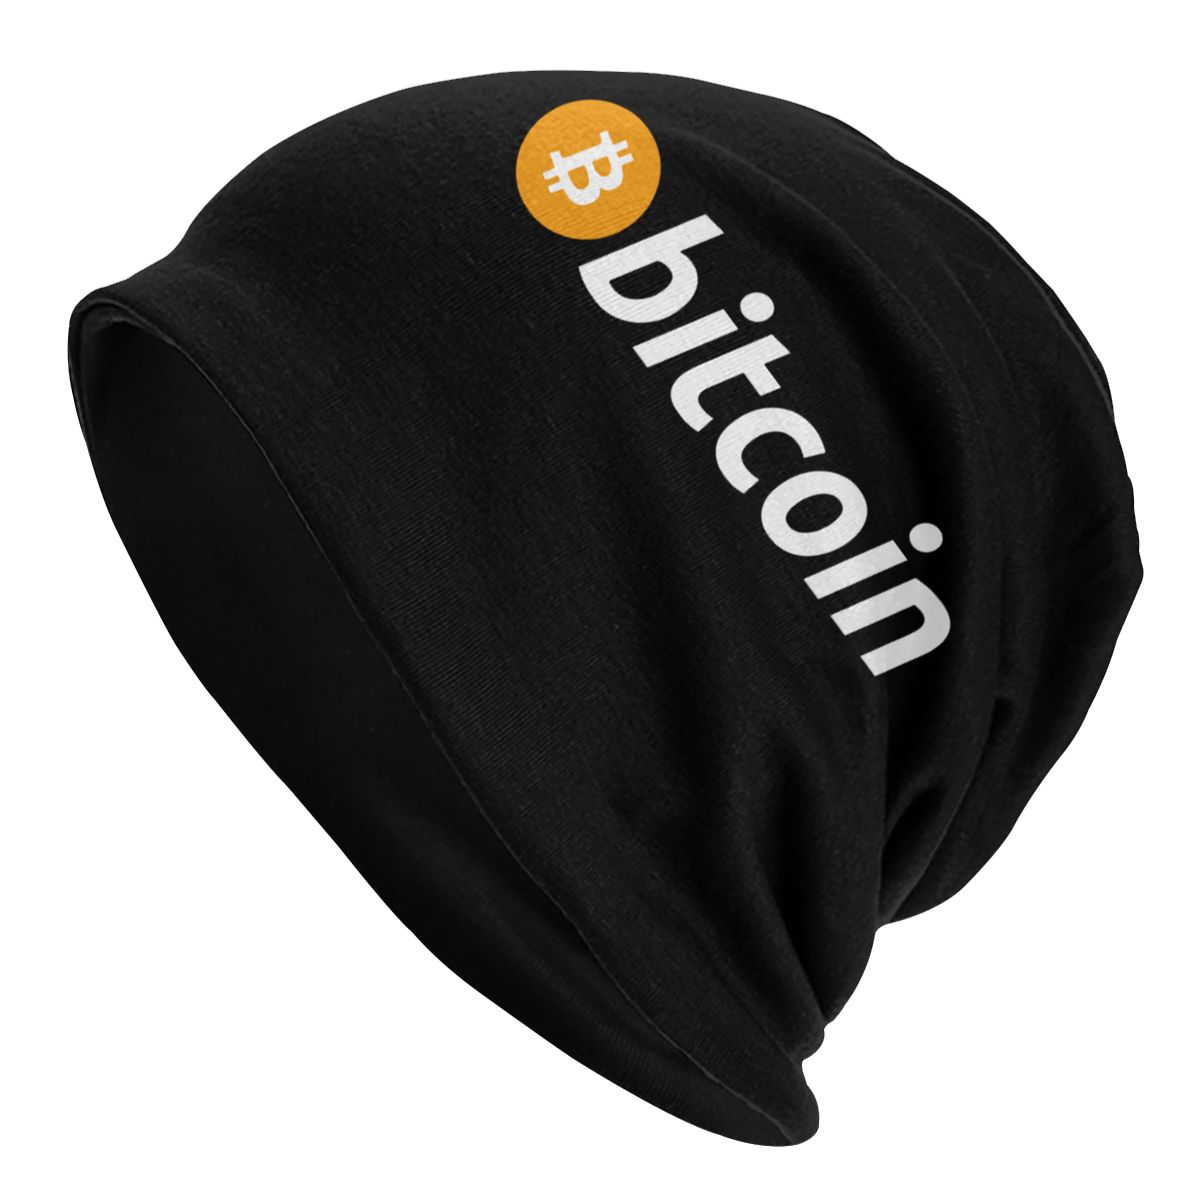 Bitcoin Knitted hat